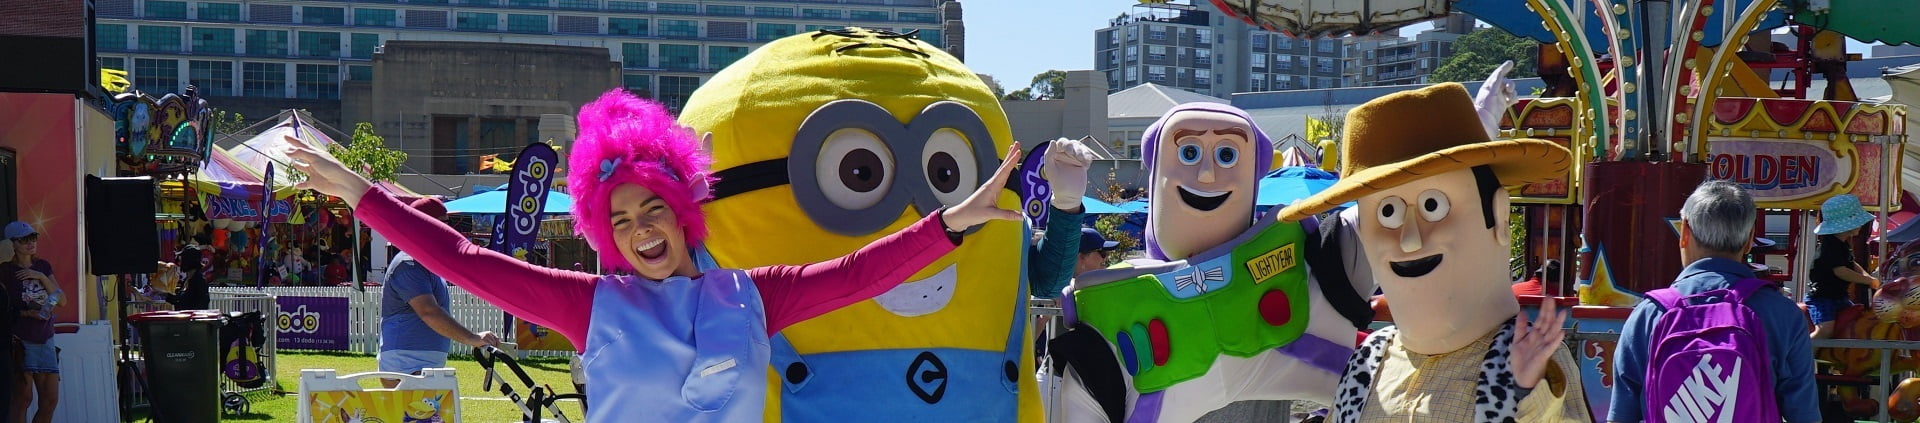 image of corporate event roving entertainers Poppy Troll, Minion, Buzz Lightyear, Woody the Cowboy